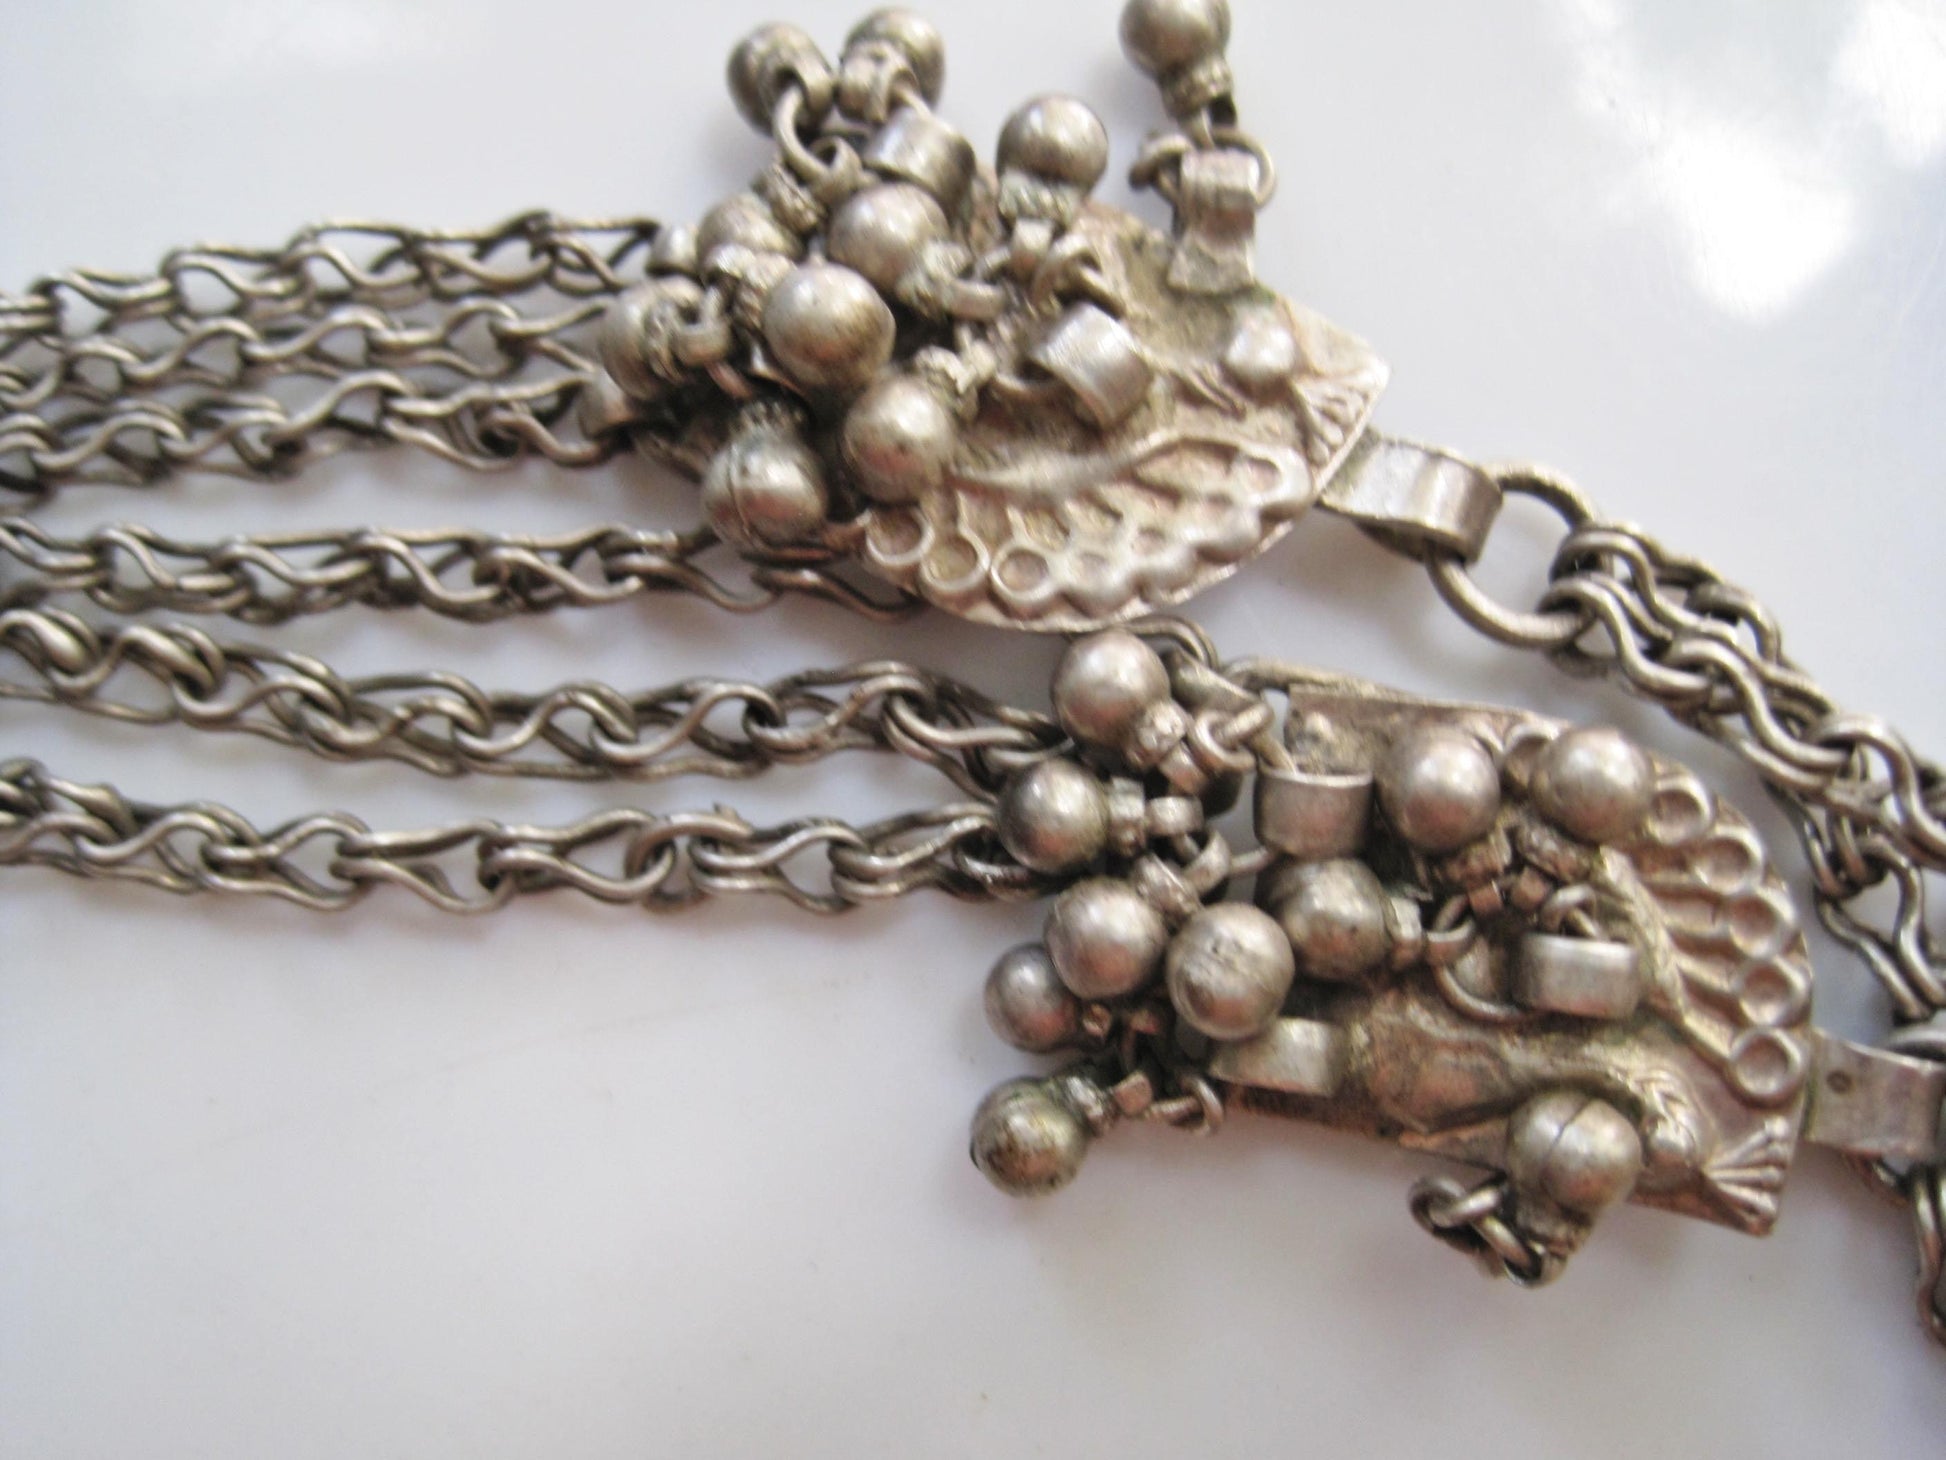 ethnic silver necklace